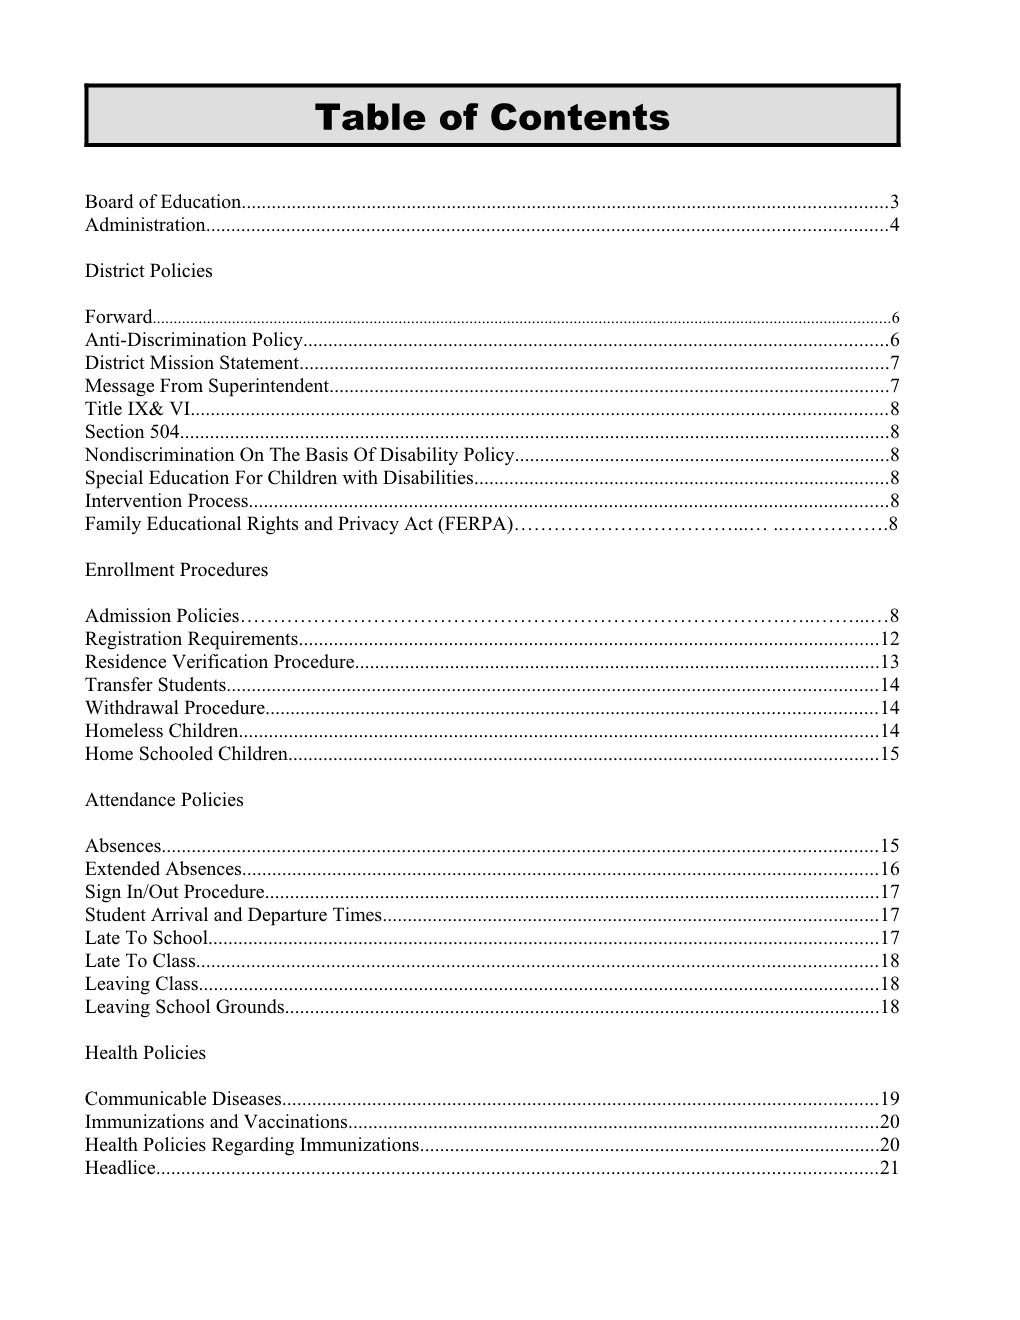 Table of Contents s426